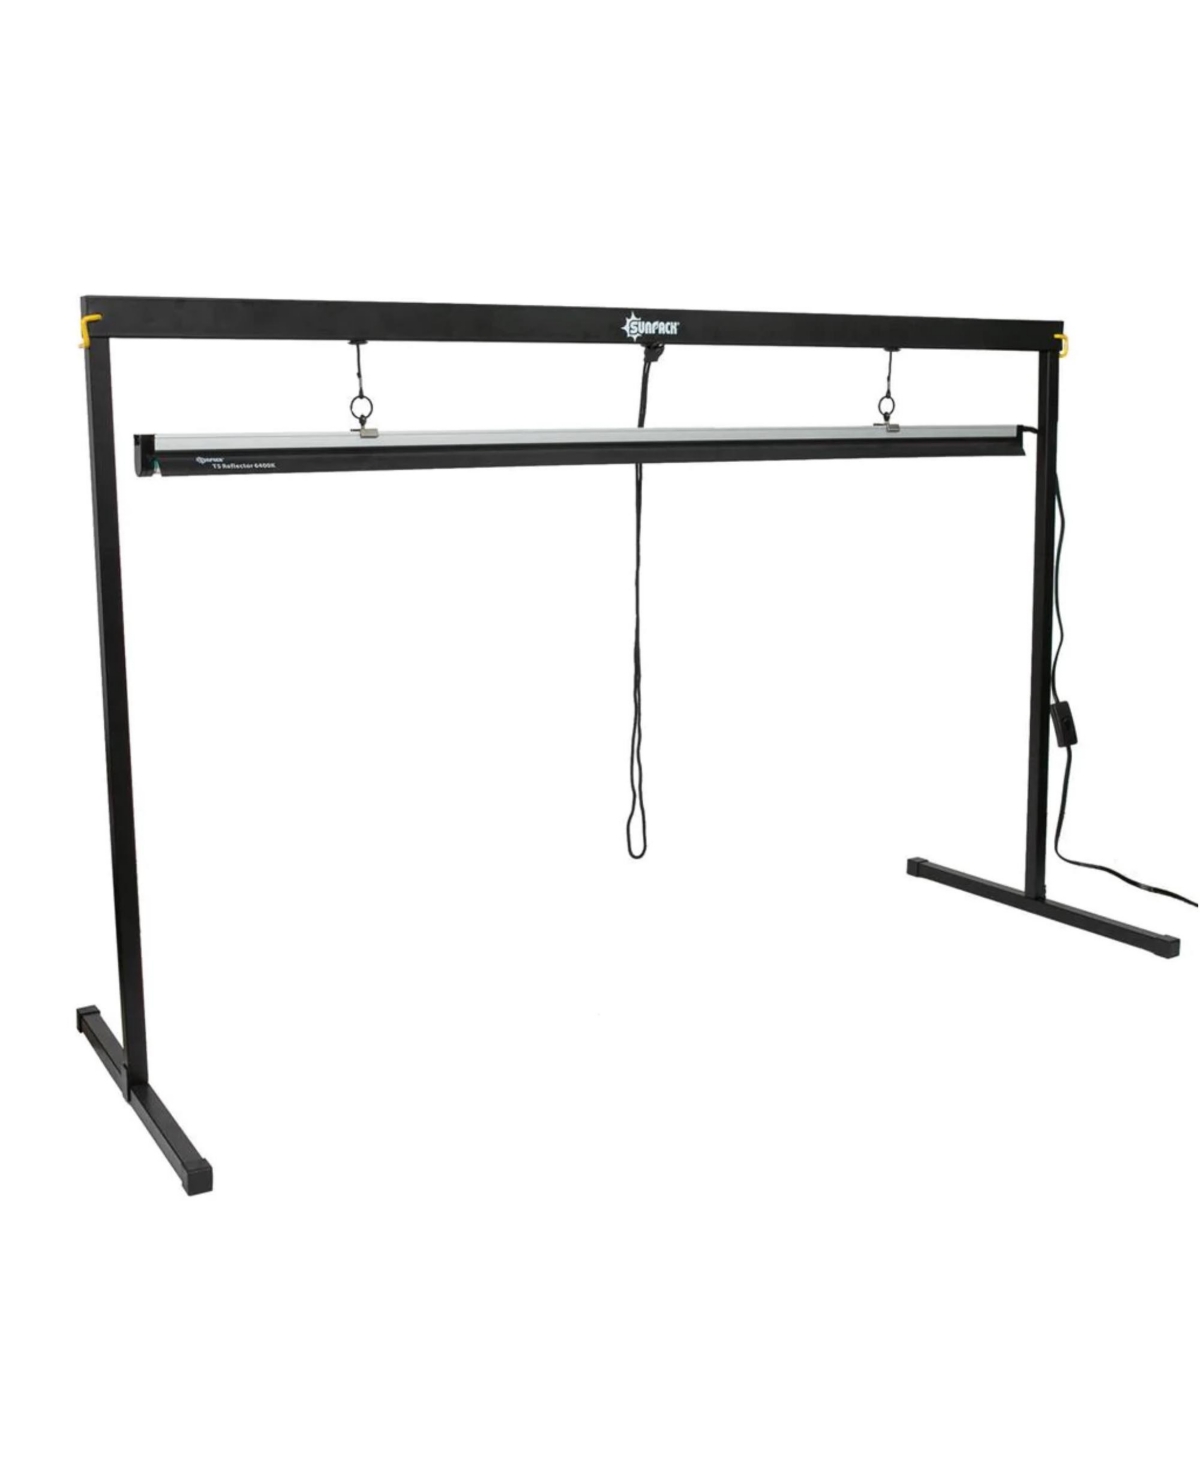 Greenhouse Metal Light Stand with Light System, 4' - Black